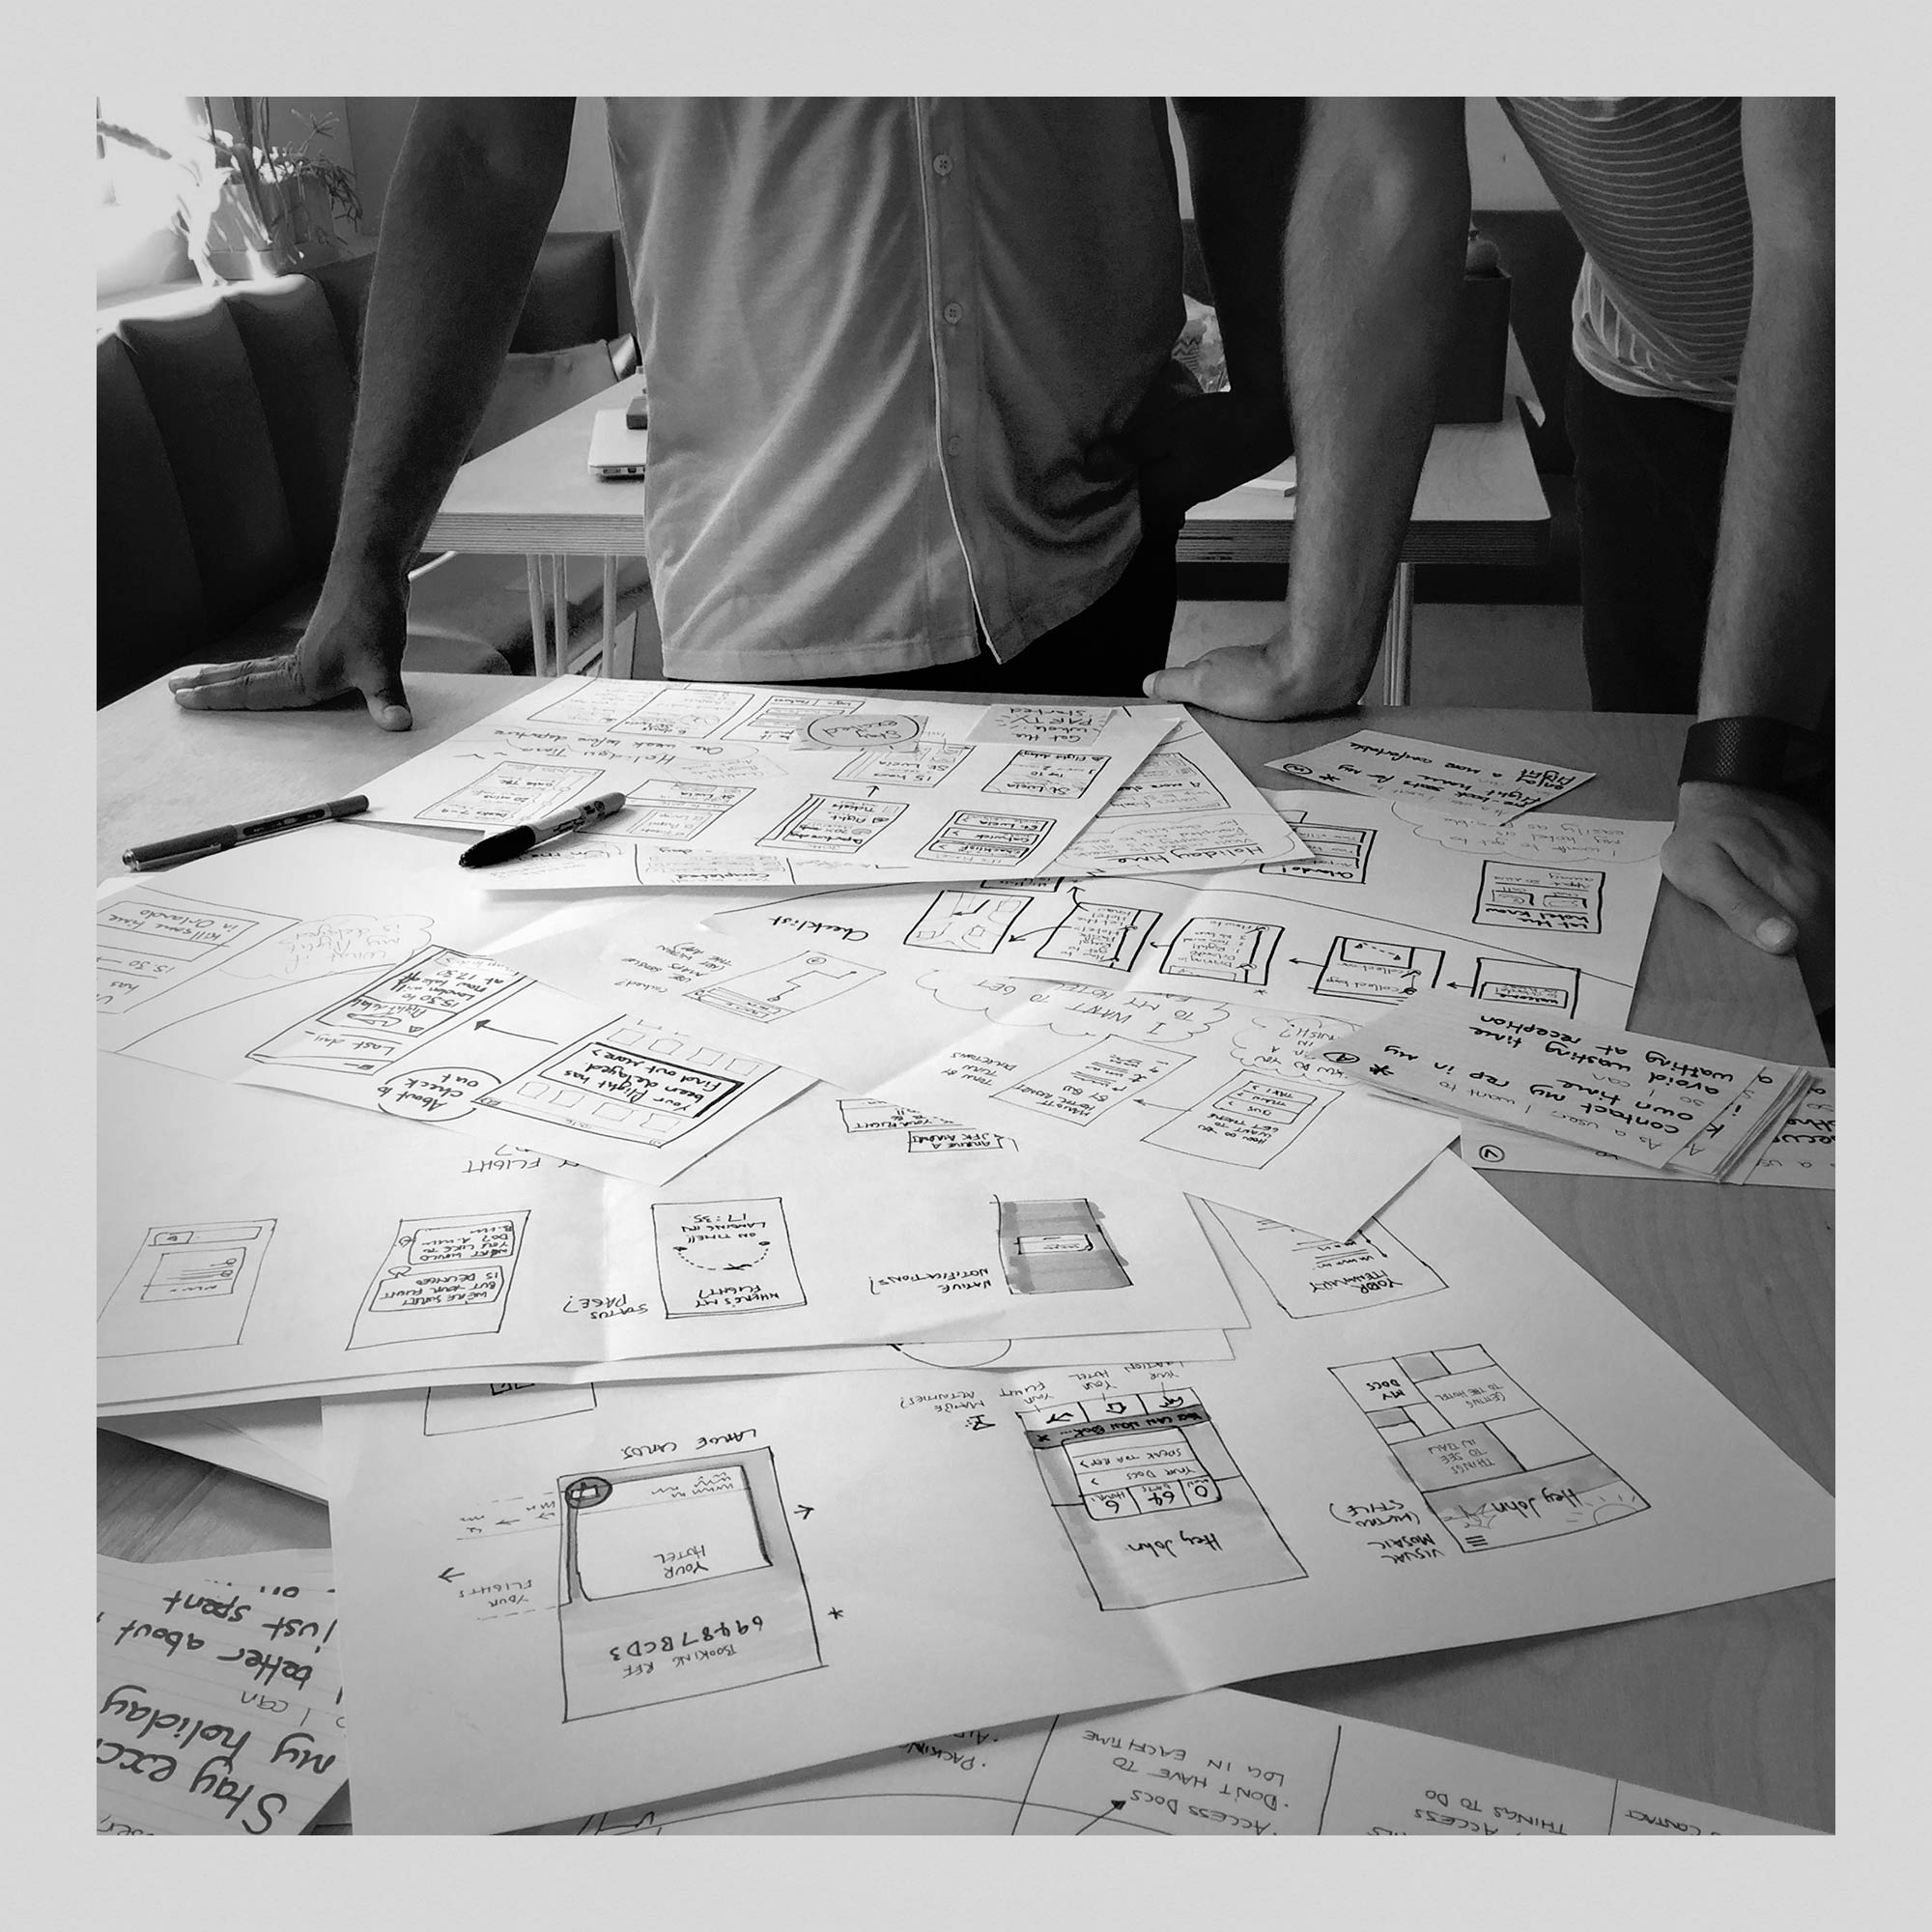 Sketching potential propositions for the Virgin Holidays app